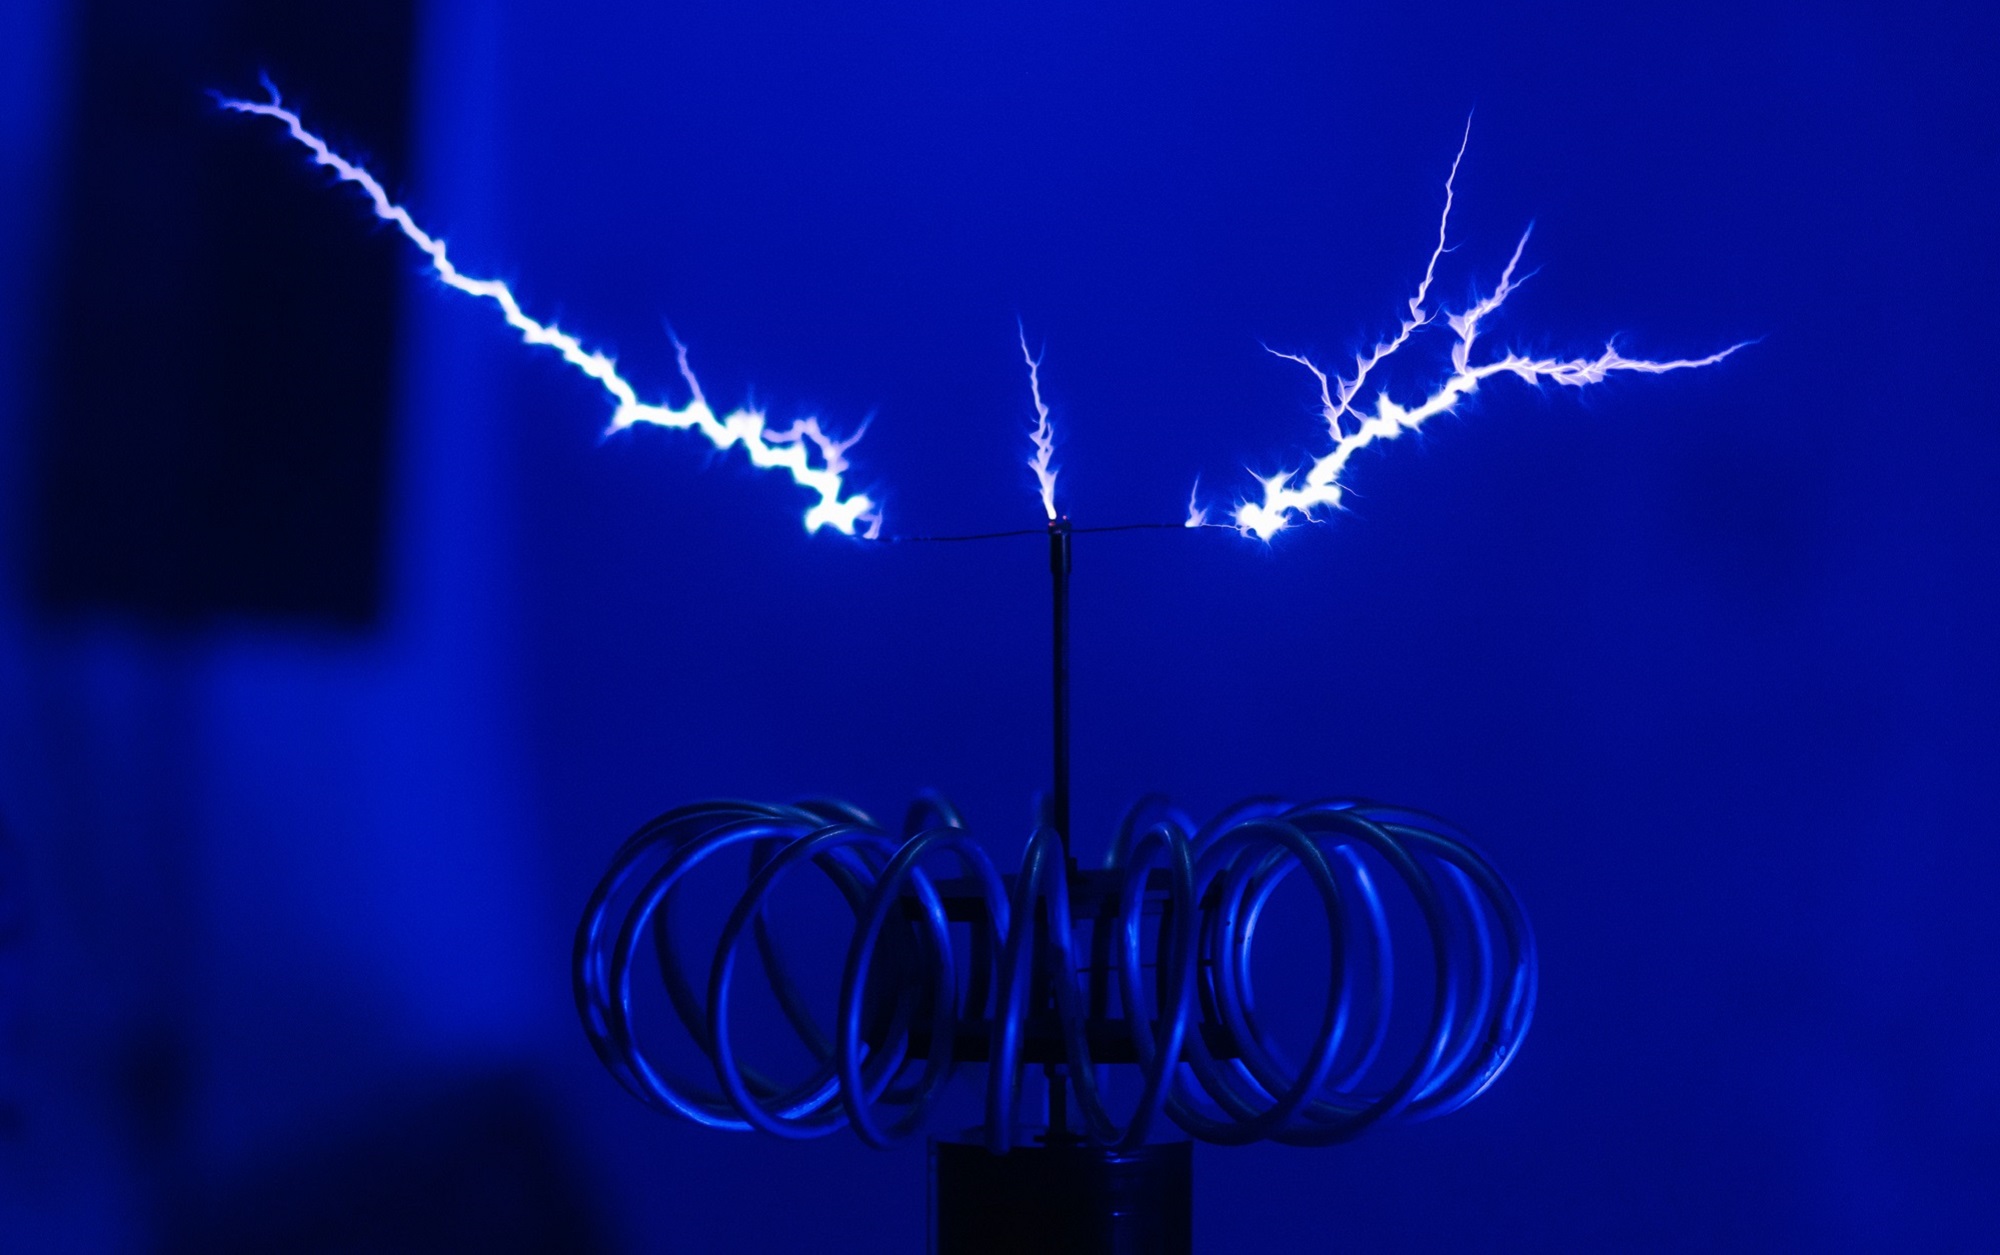 How does electricity work? Let’s demystify the life-changing physics.